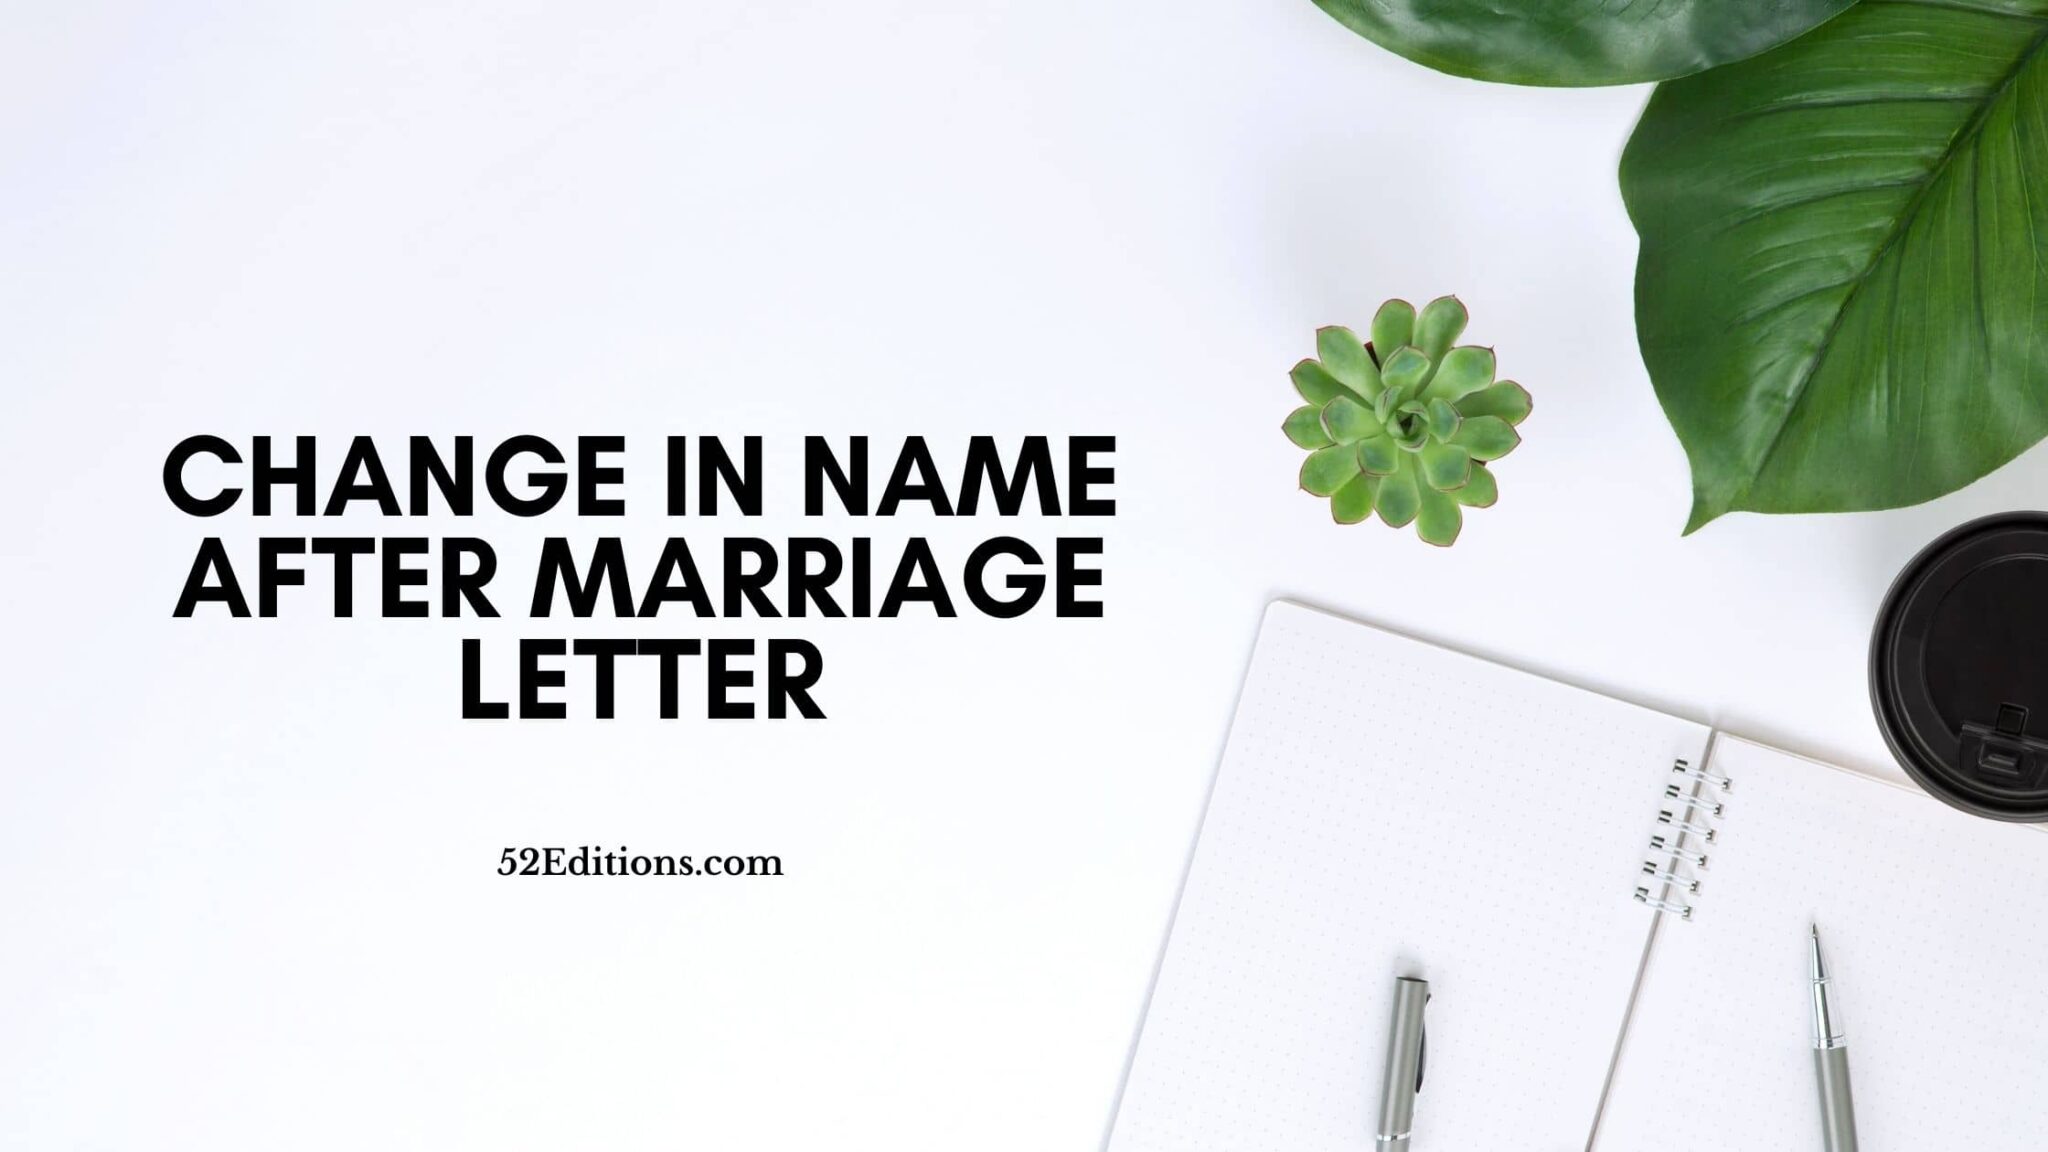 cover letter for changing name after marriage